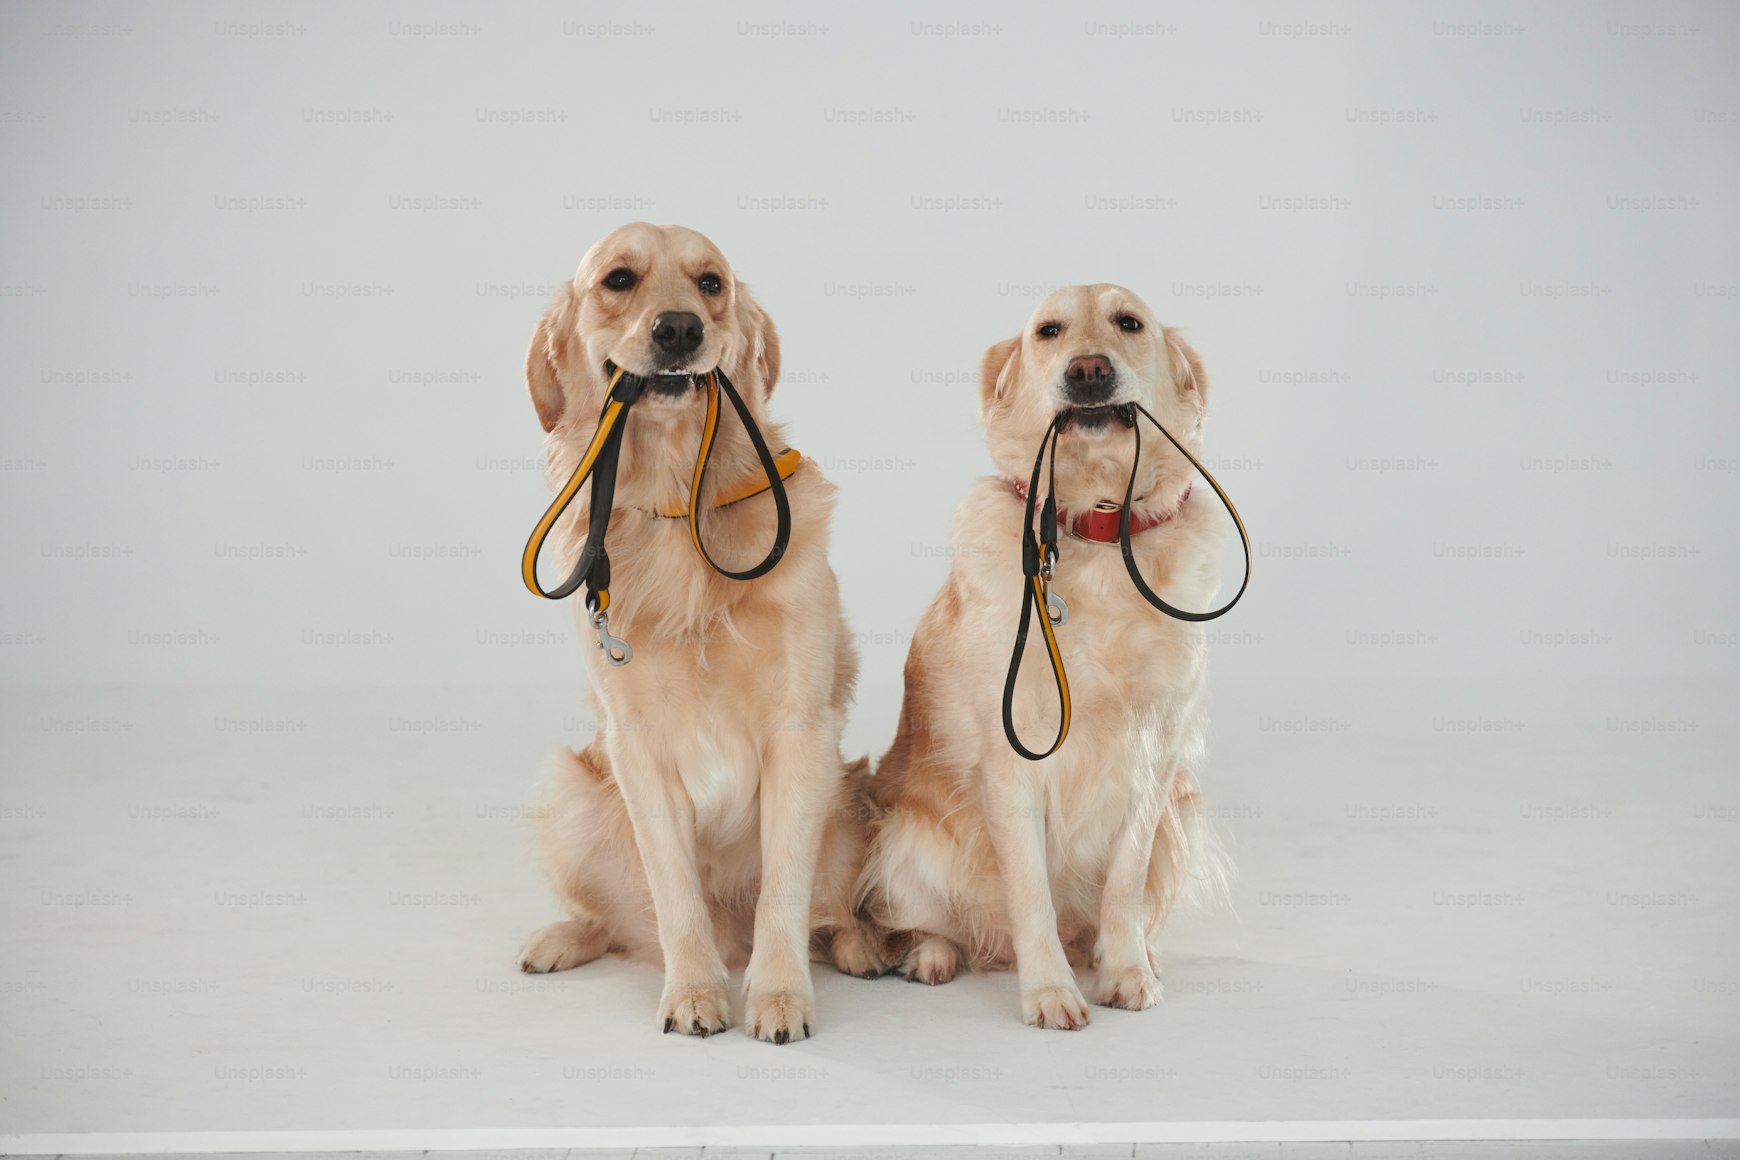 Learning about Golden Retrievers: Intelligence and Behavior